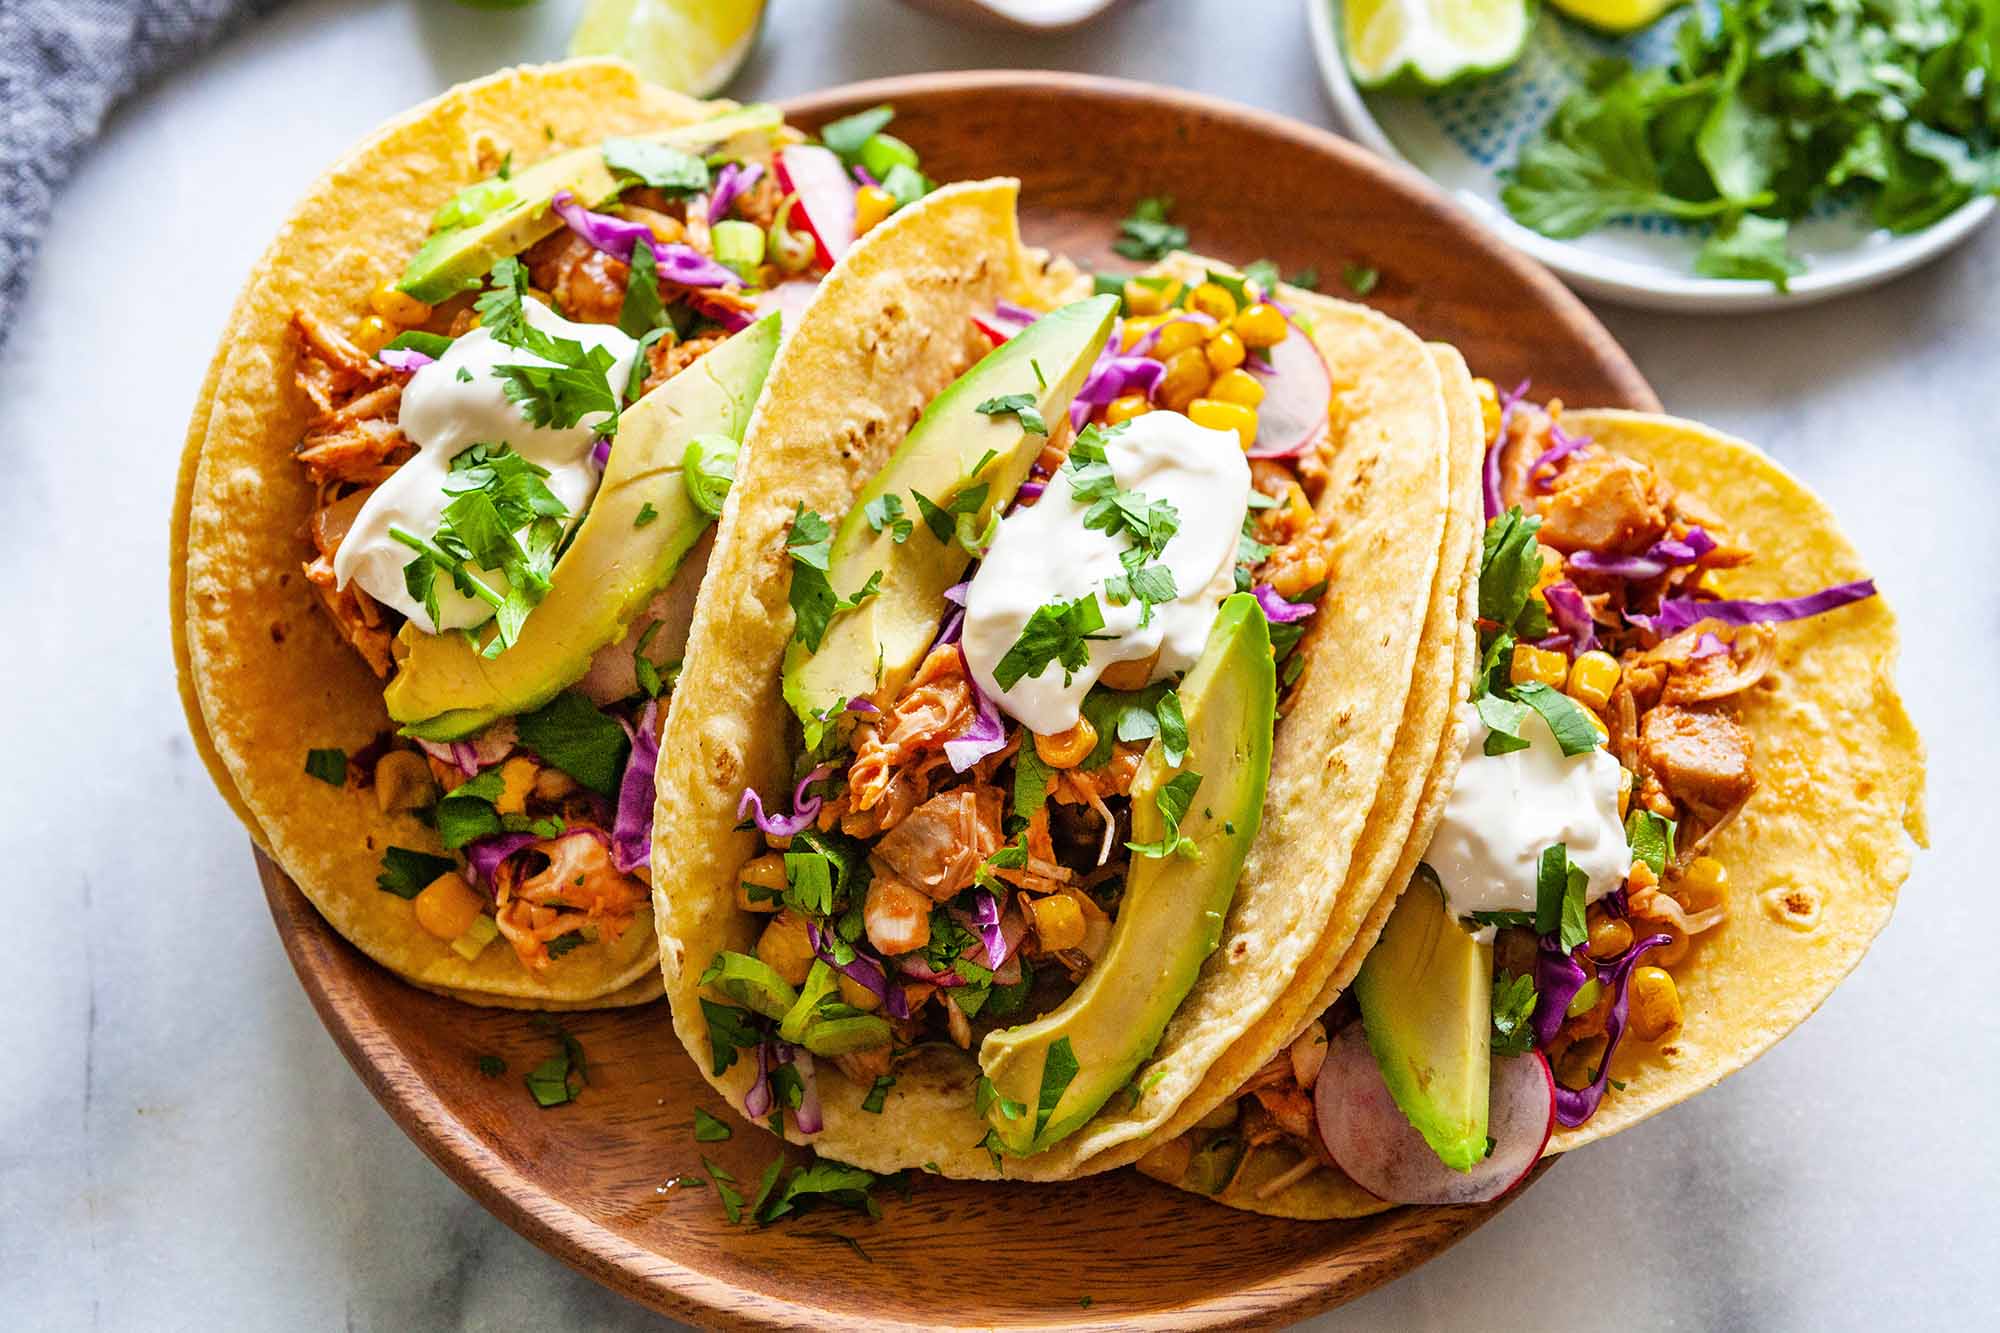 Eat at This 20-Course Buffet and We’ll Reveal What People Like About You Tacos